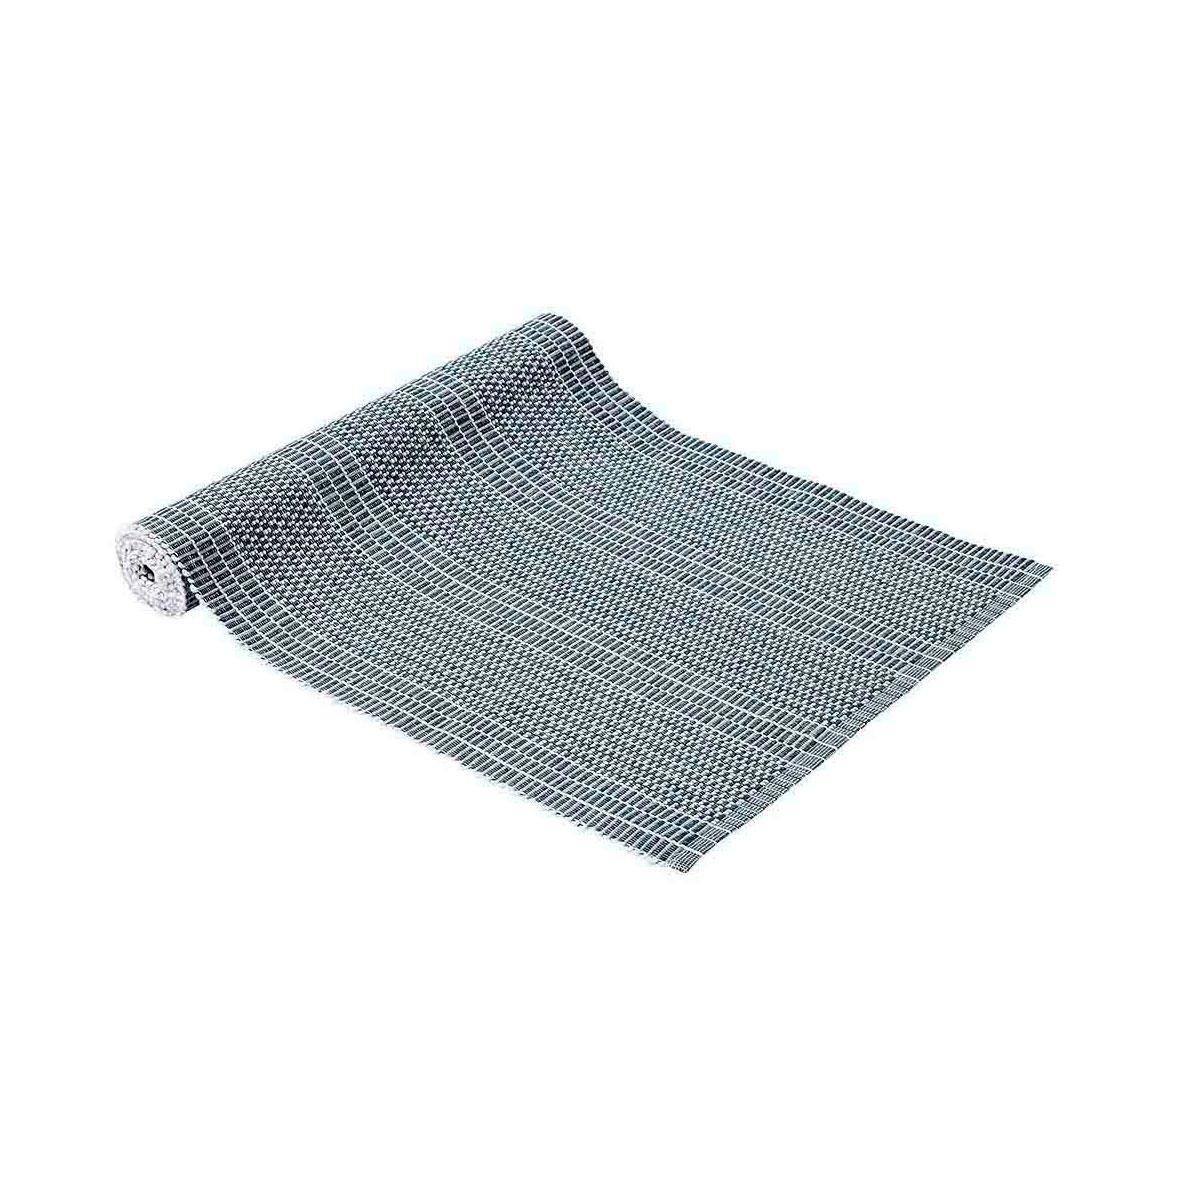 Ladelle Repose Ribbed 100% Cotton Table Runner Navy